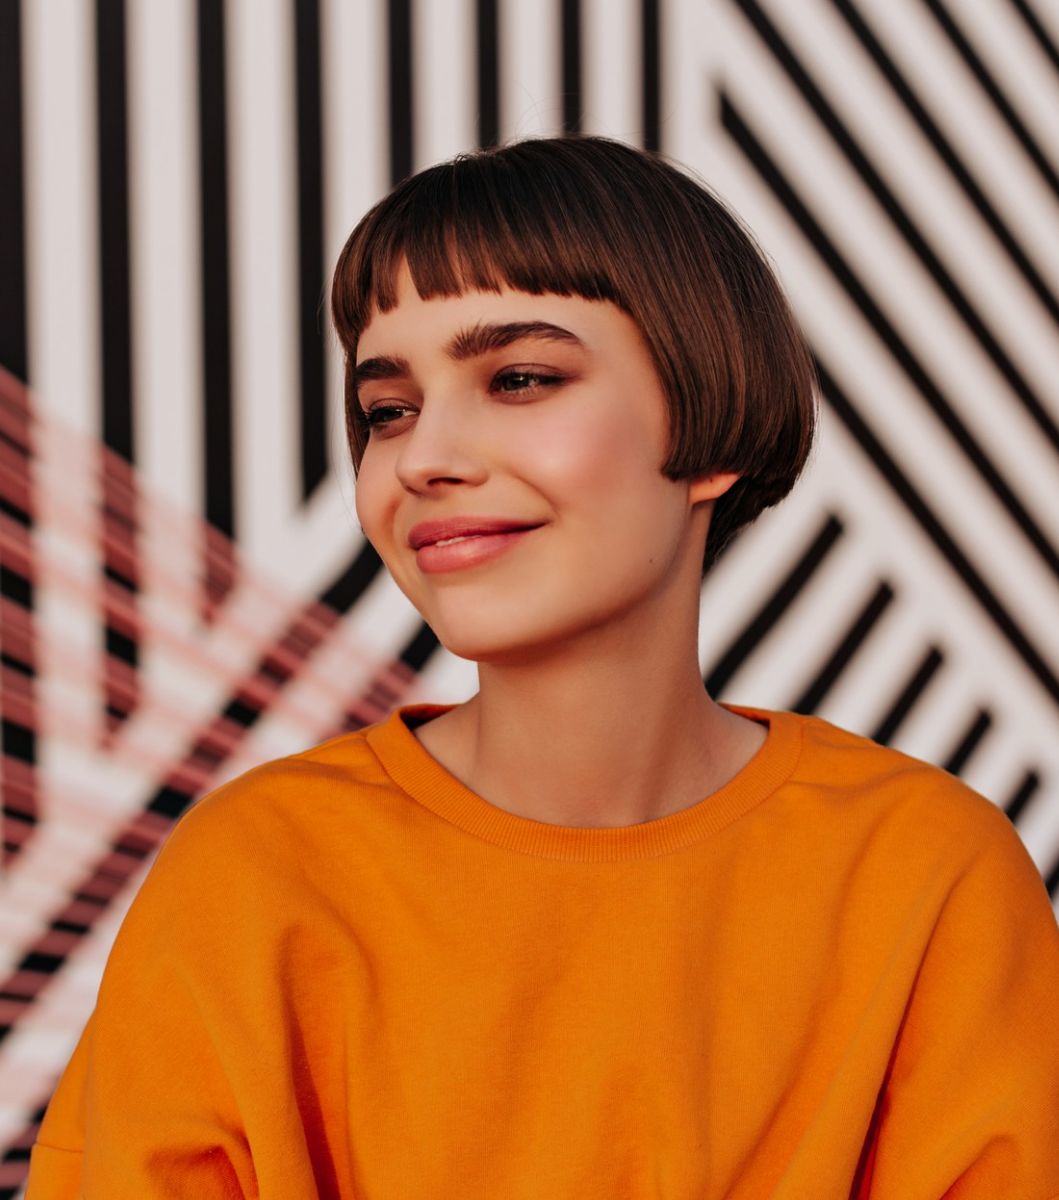 Woman with a bowl cut haircut with long sides.